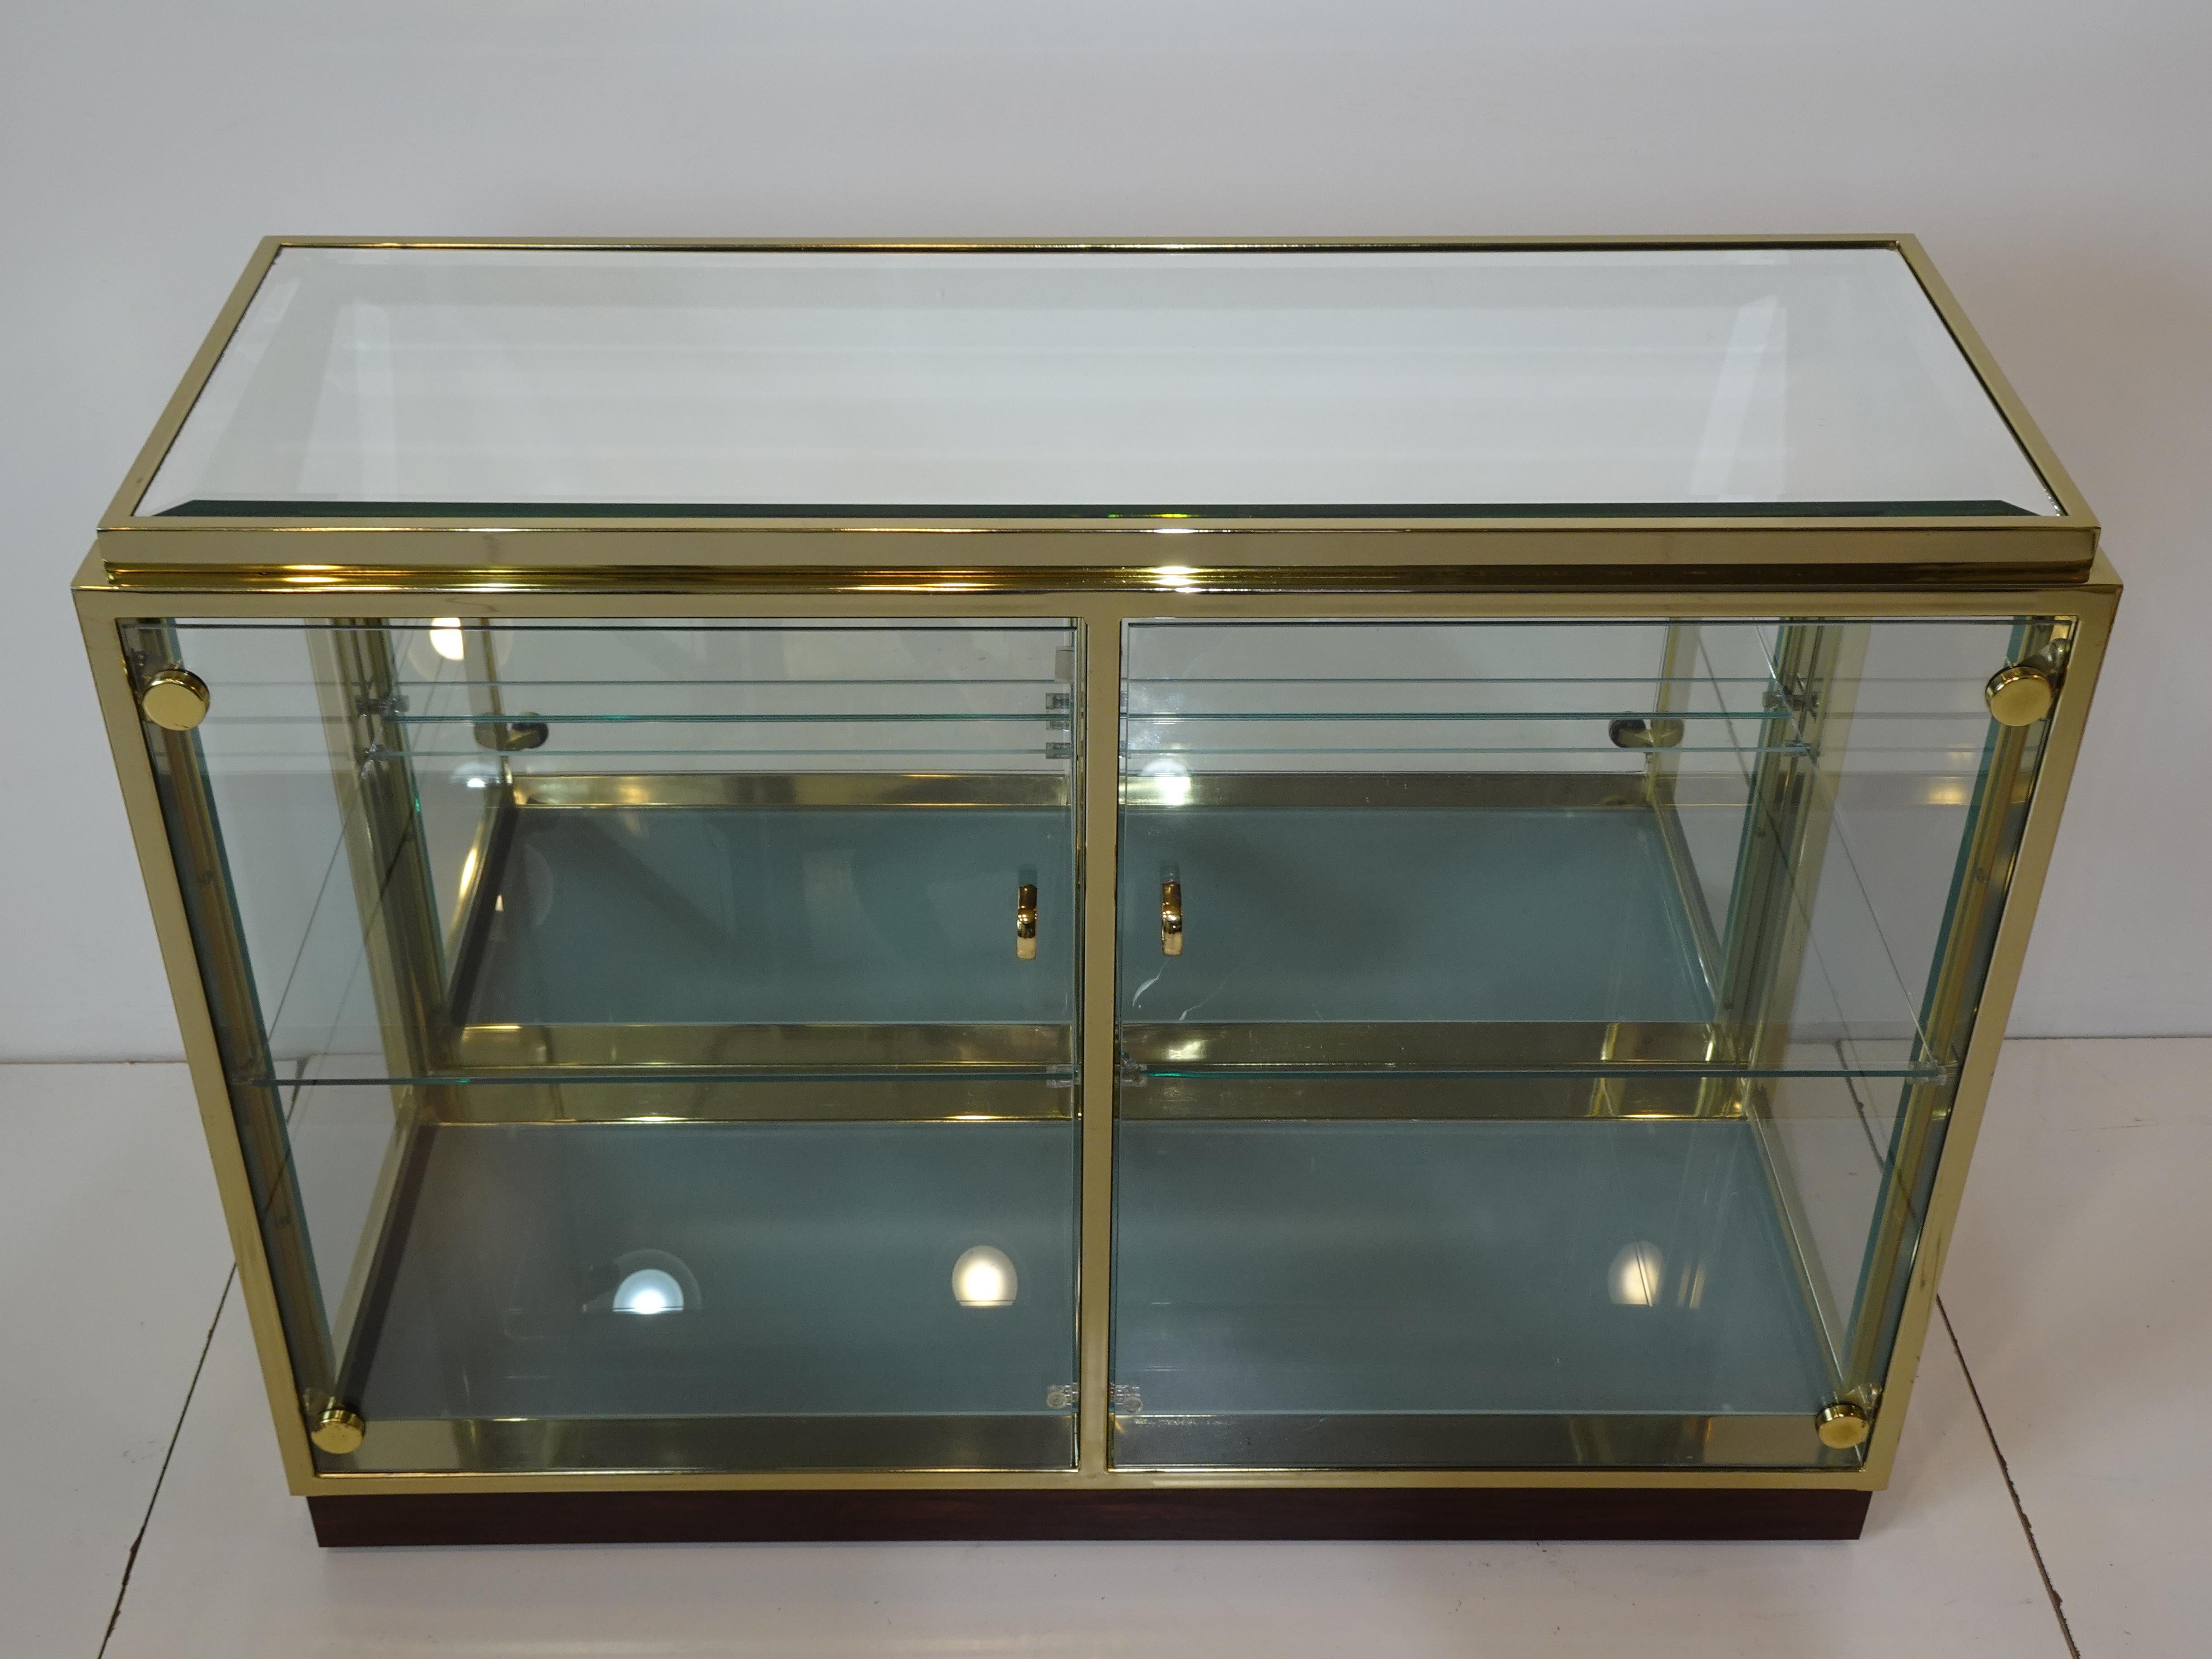 A very well crafted brass framed and rosewood bar cabinet with double glass doors and sides with beveled mirrored top and brass pulls . Inside the bottom has frosted glass with under lighting and two adjustable glass shelves to the inside for